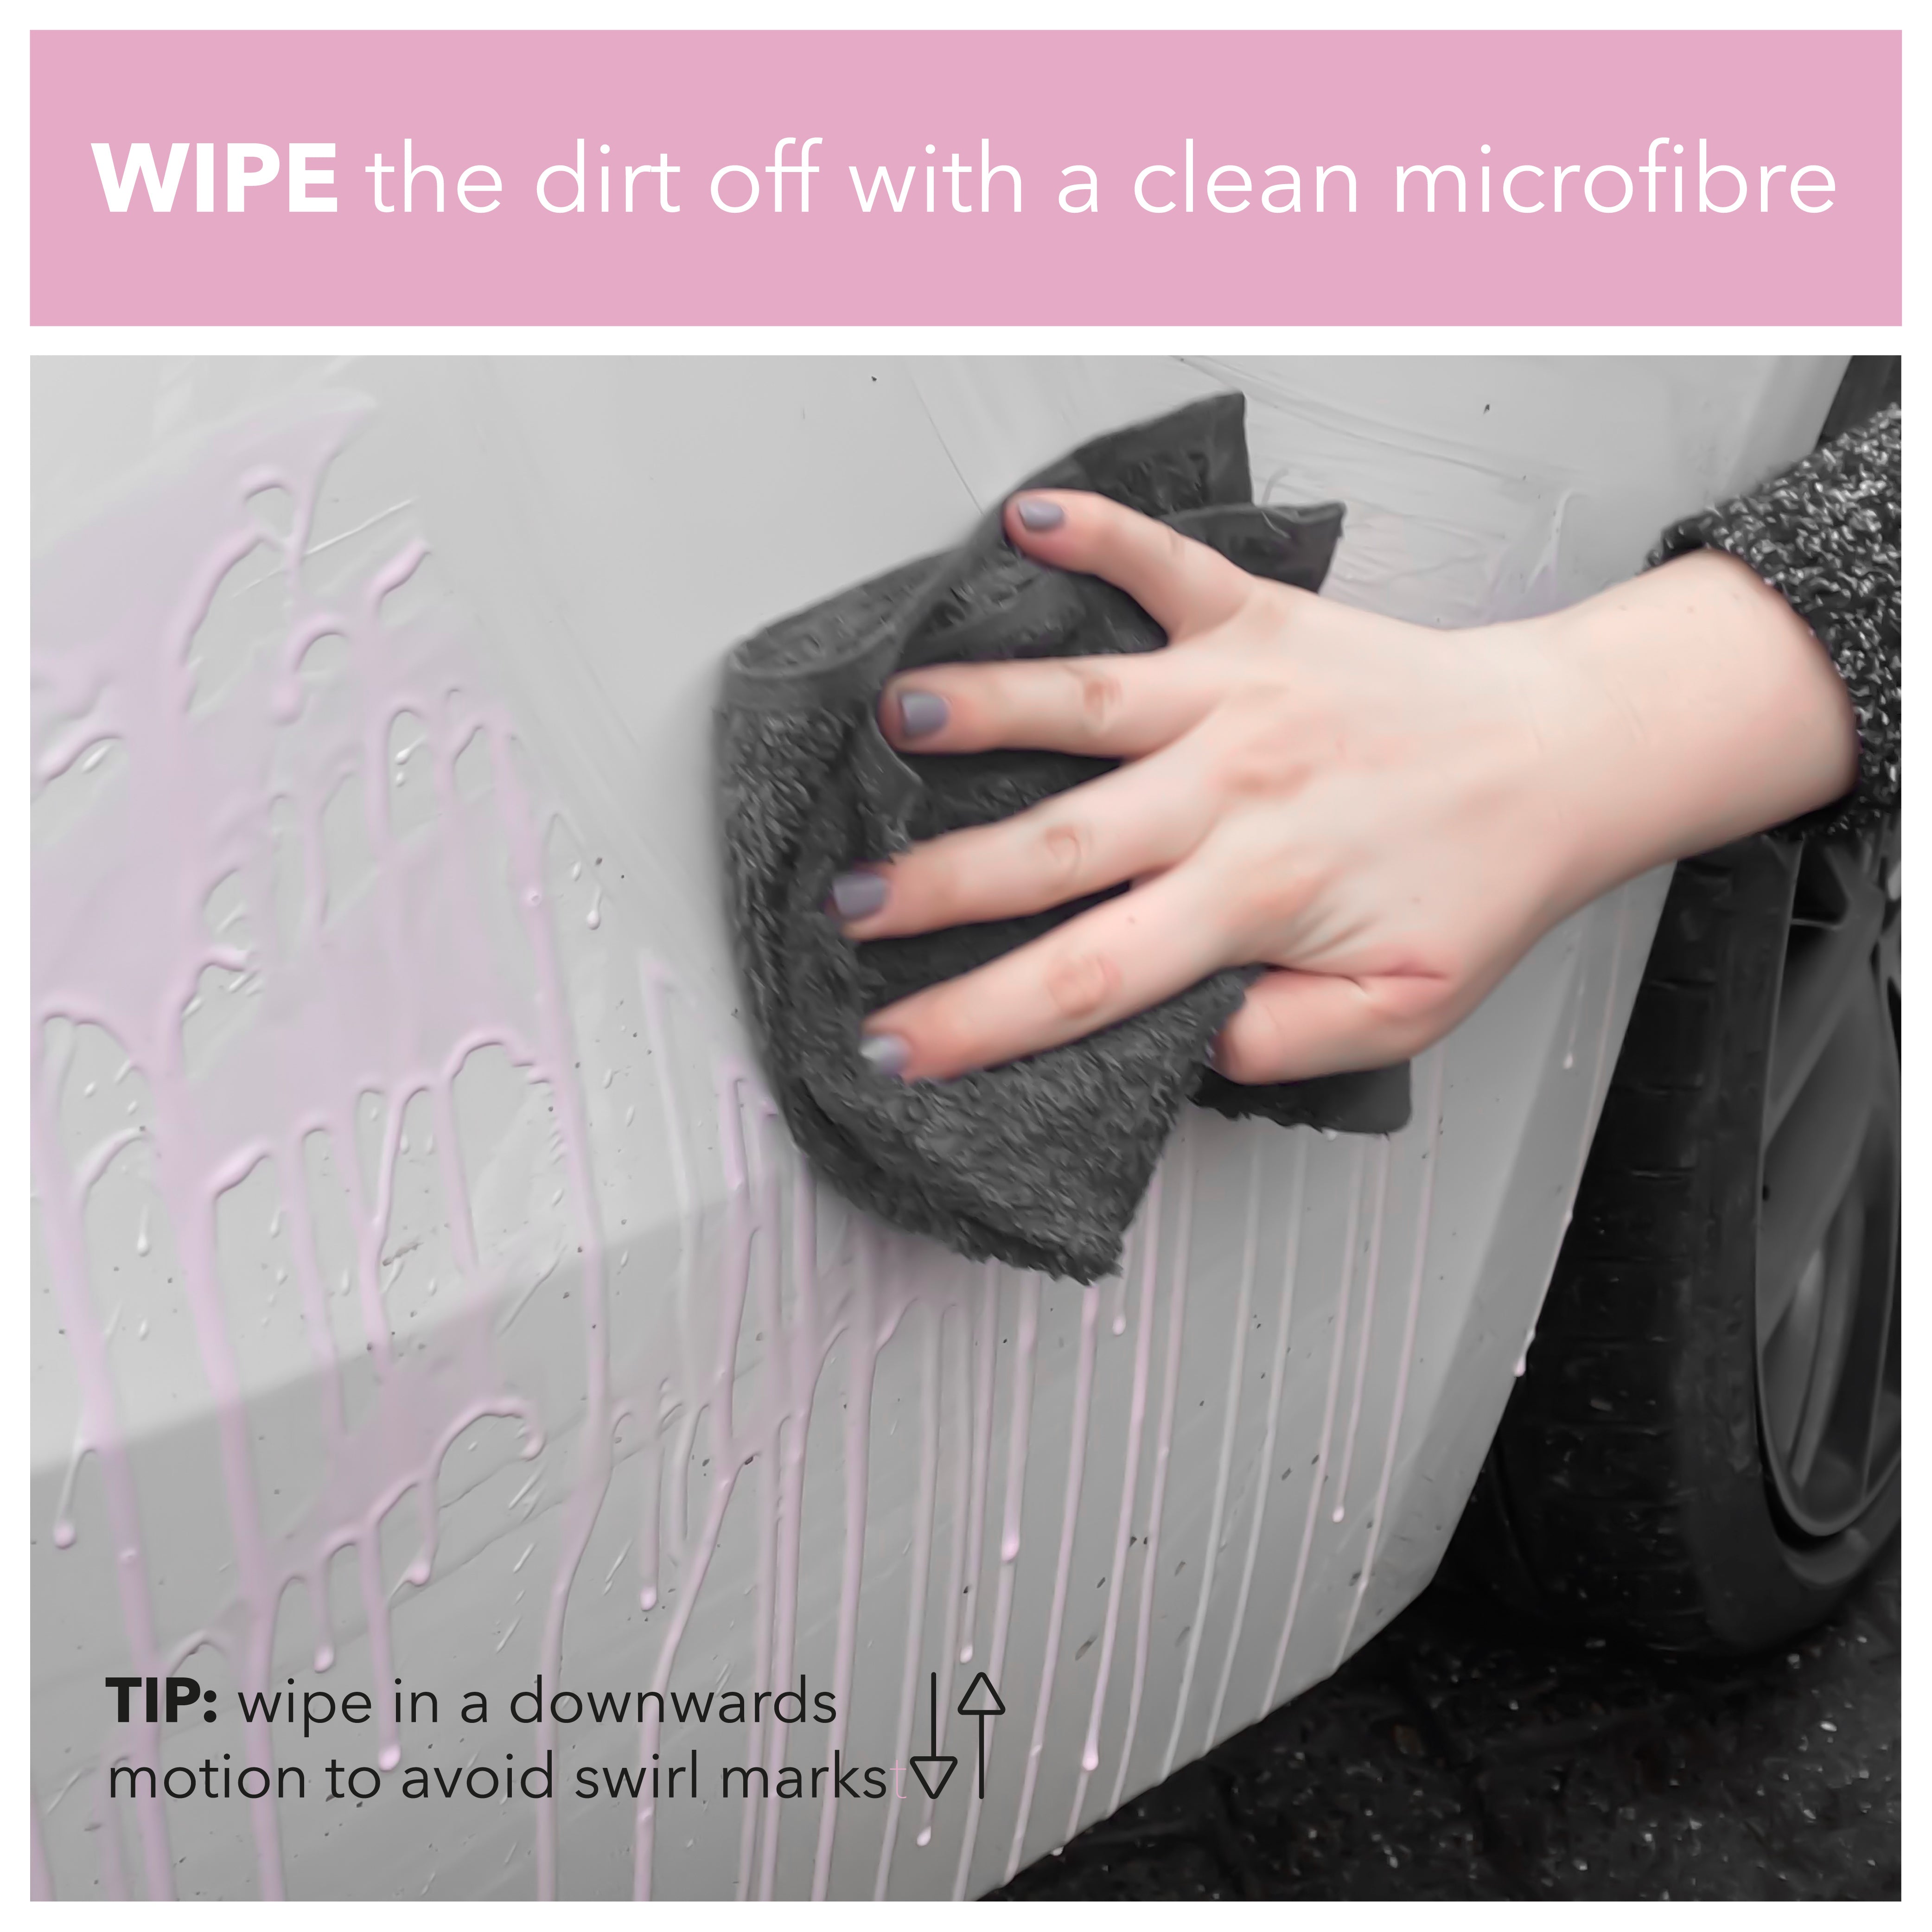 Wipe the dirt off with a clean microfibre